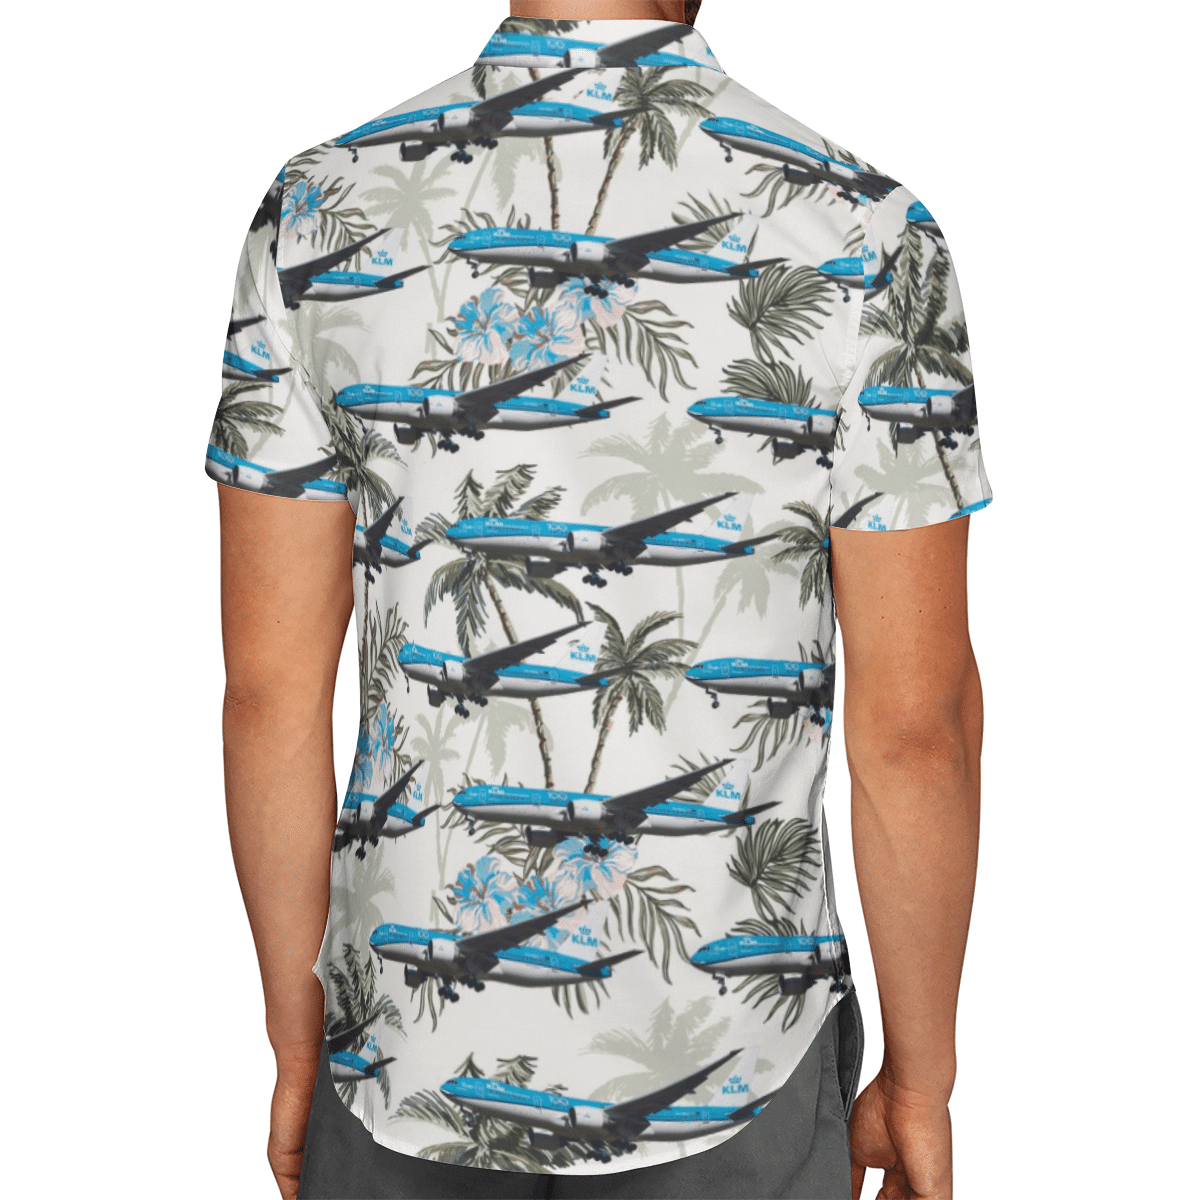 Going to the beach with a quality shirt 137